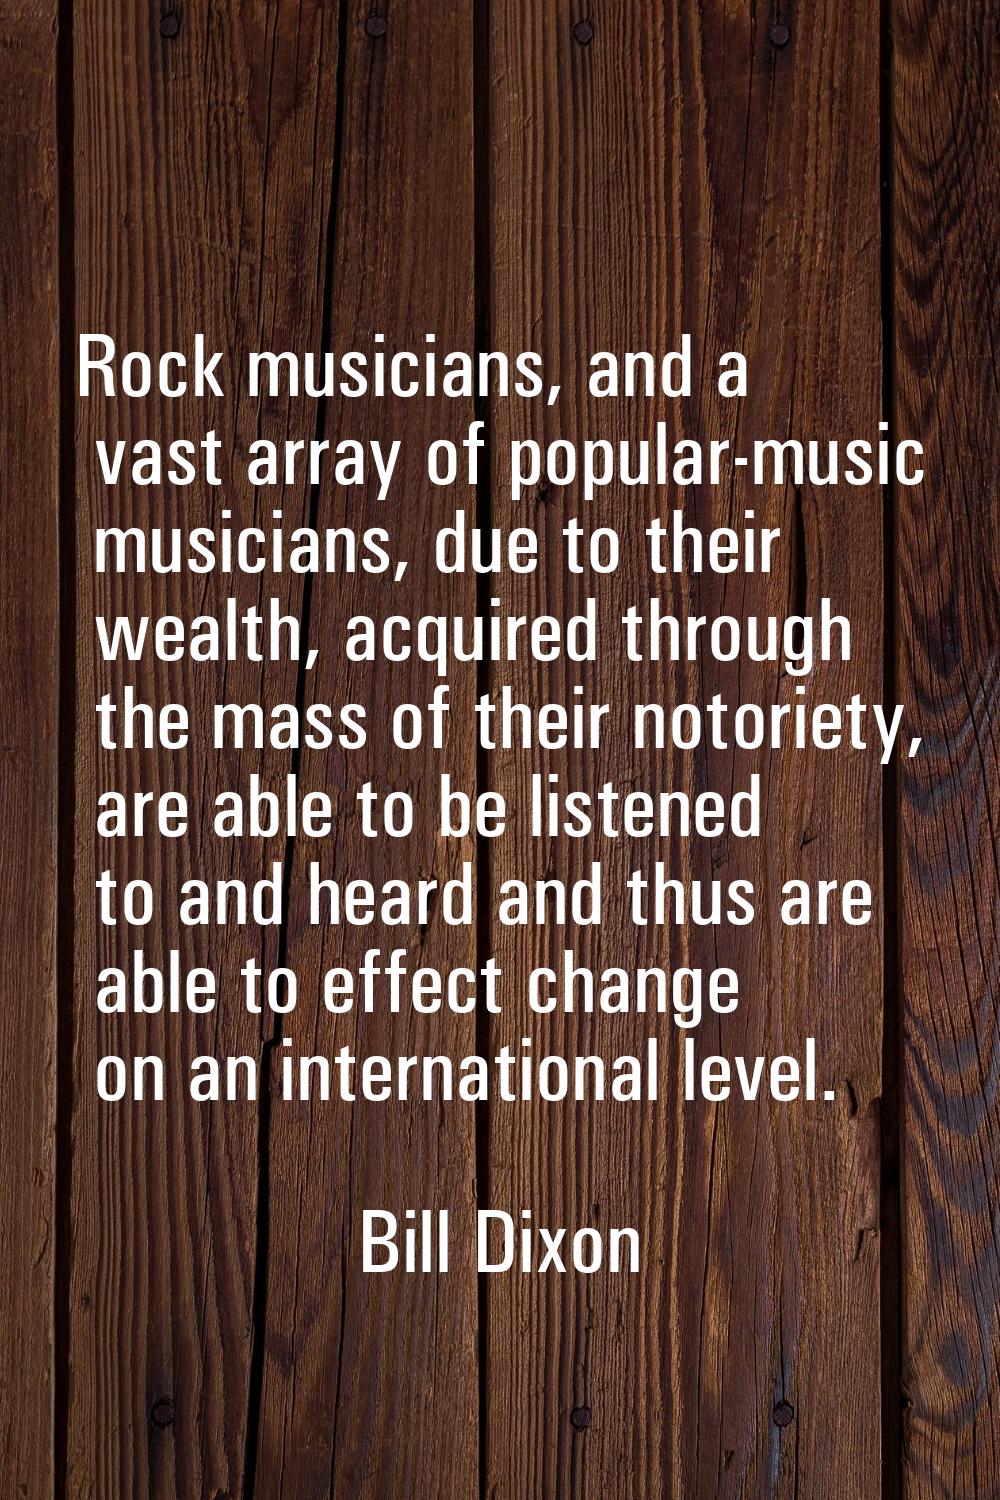 Rock musicians, and a vast array of popular-music musicians, due to their wealth, acquired through 